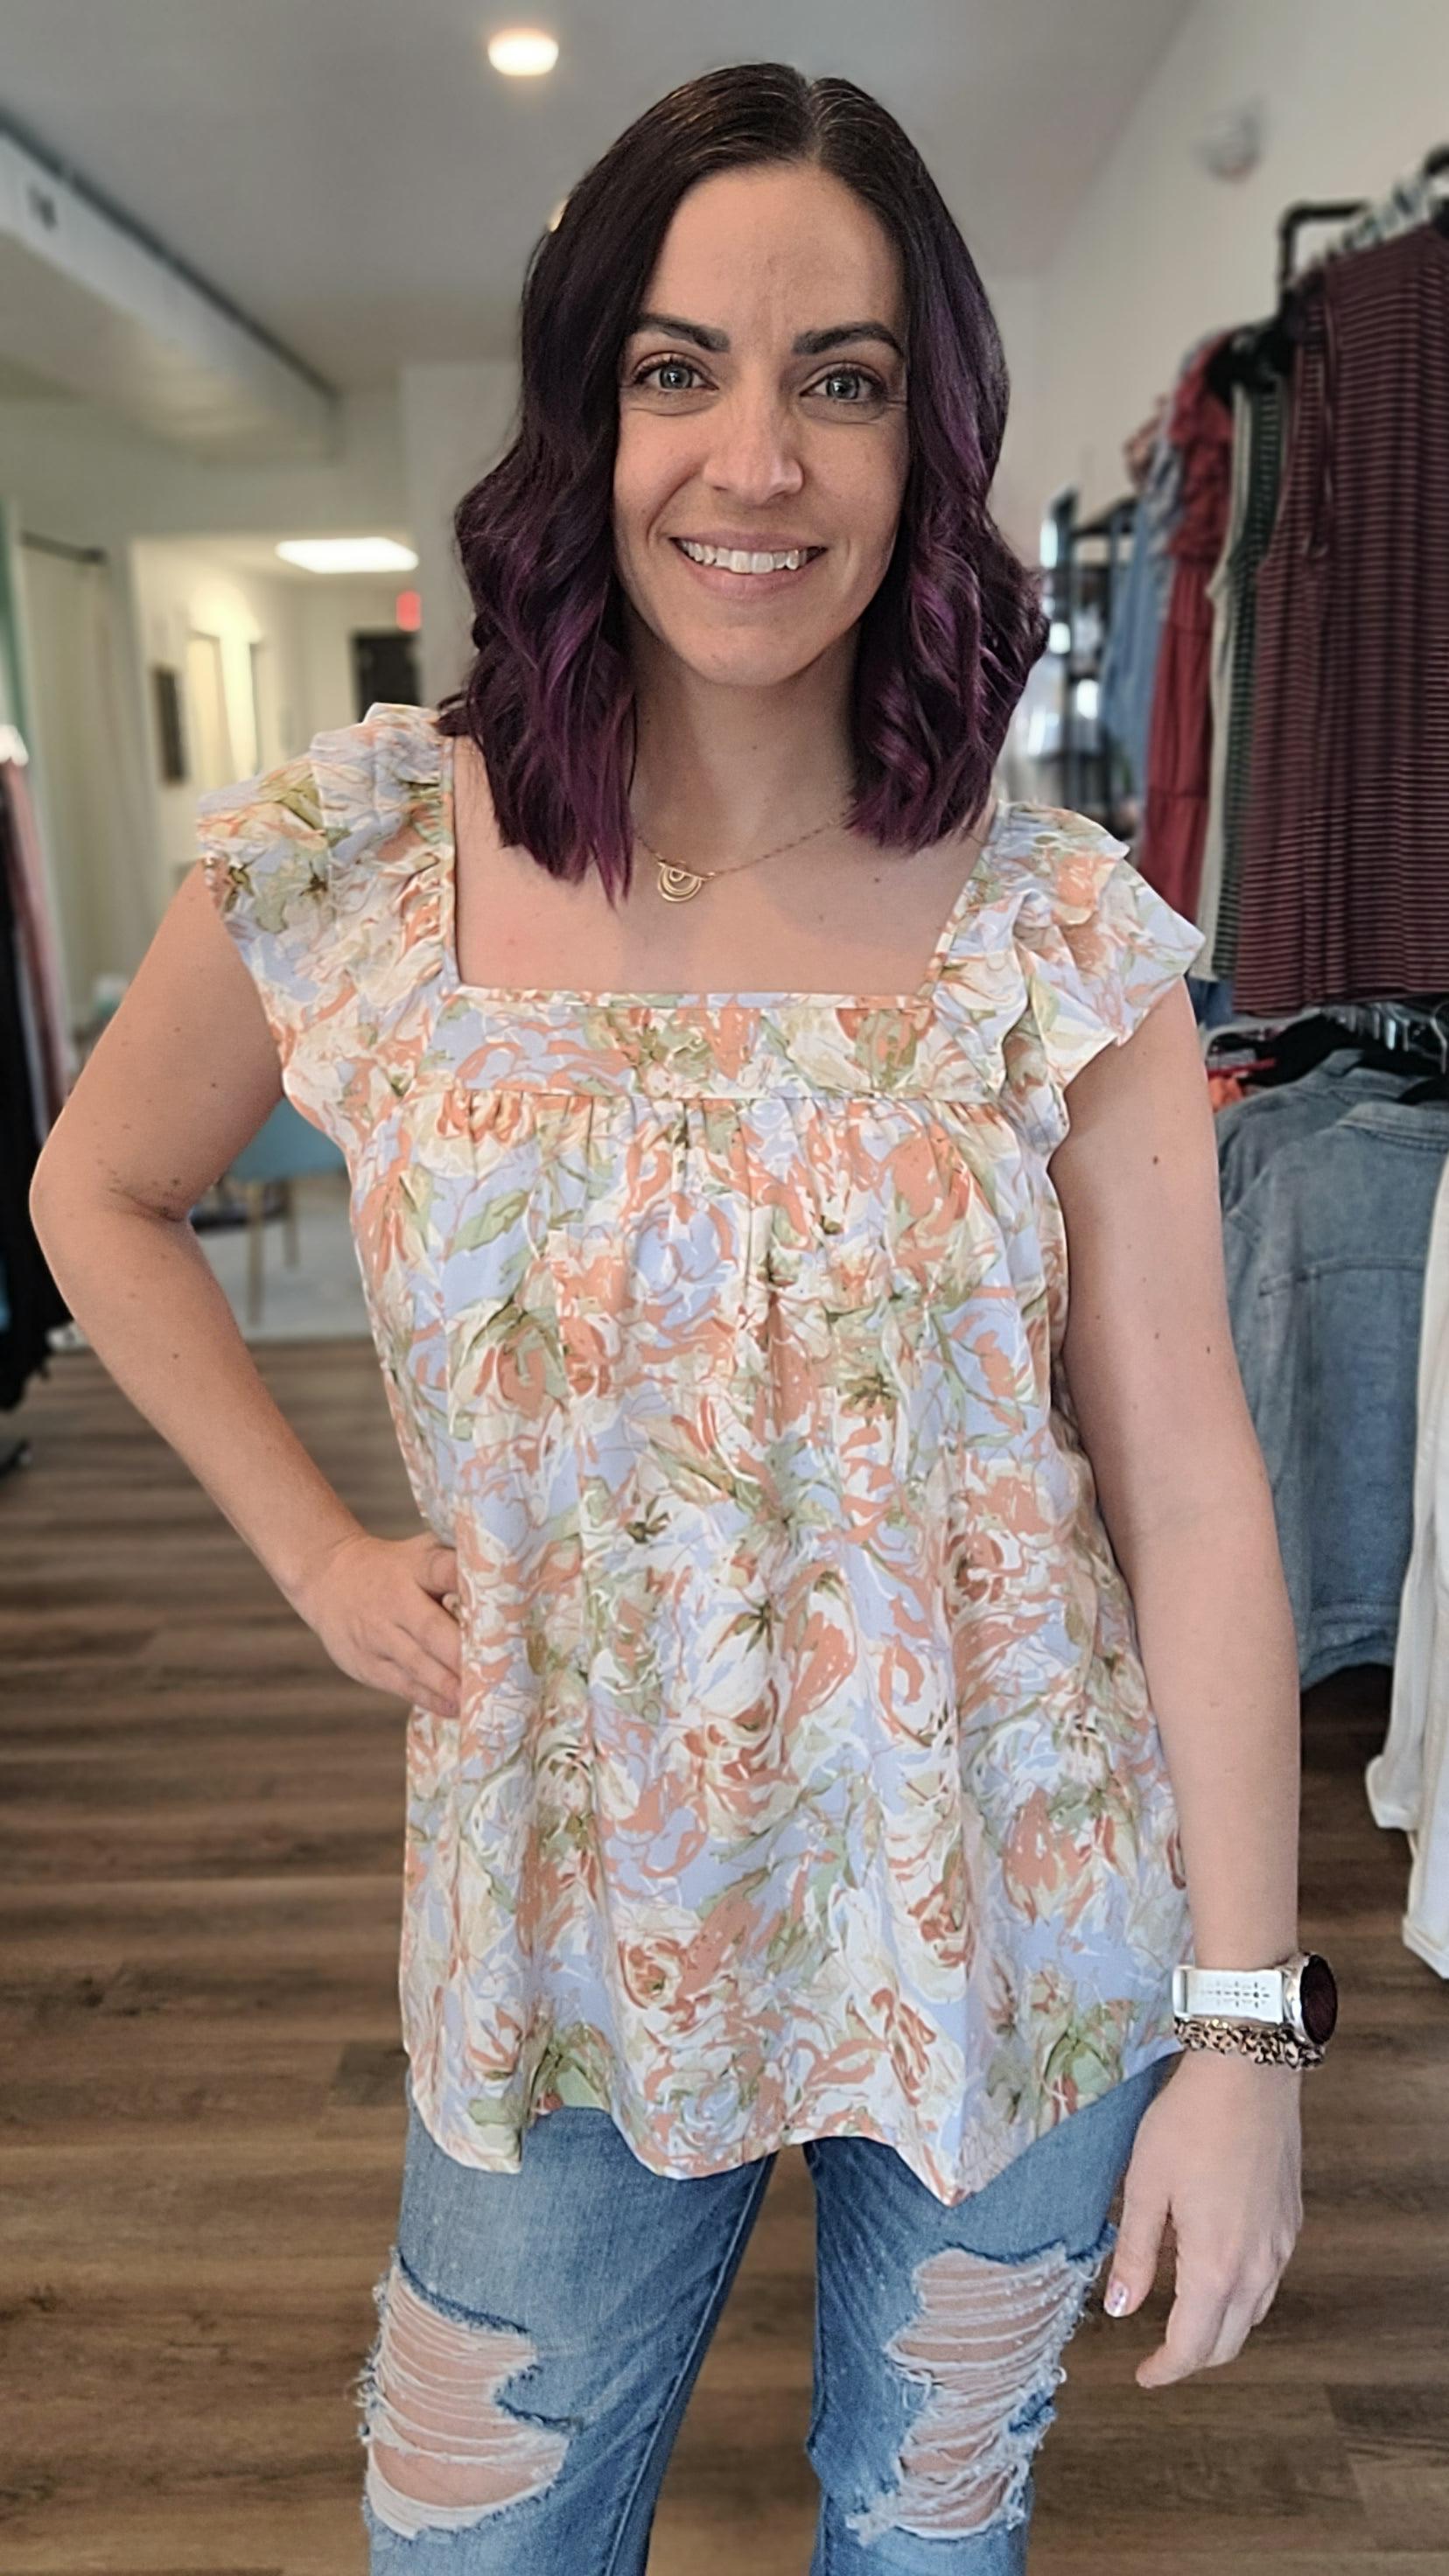 Shop Allora Floral Sleeveless Blouse-Blouse at Ruby Joy Boutique, a Women's Clothing Store in Pickerington, Ohio